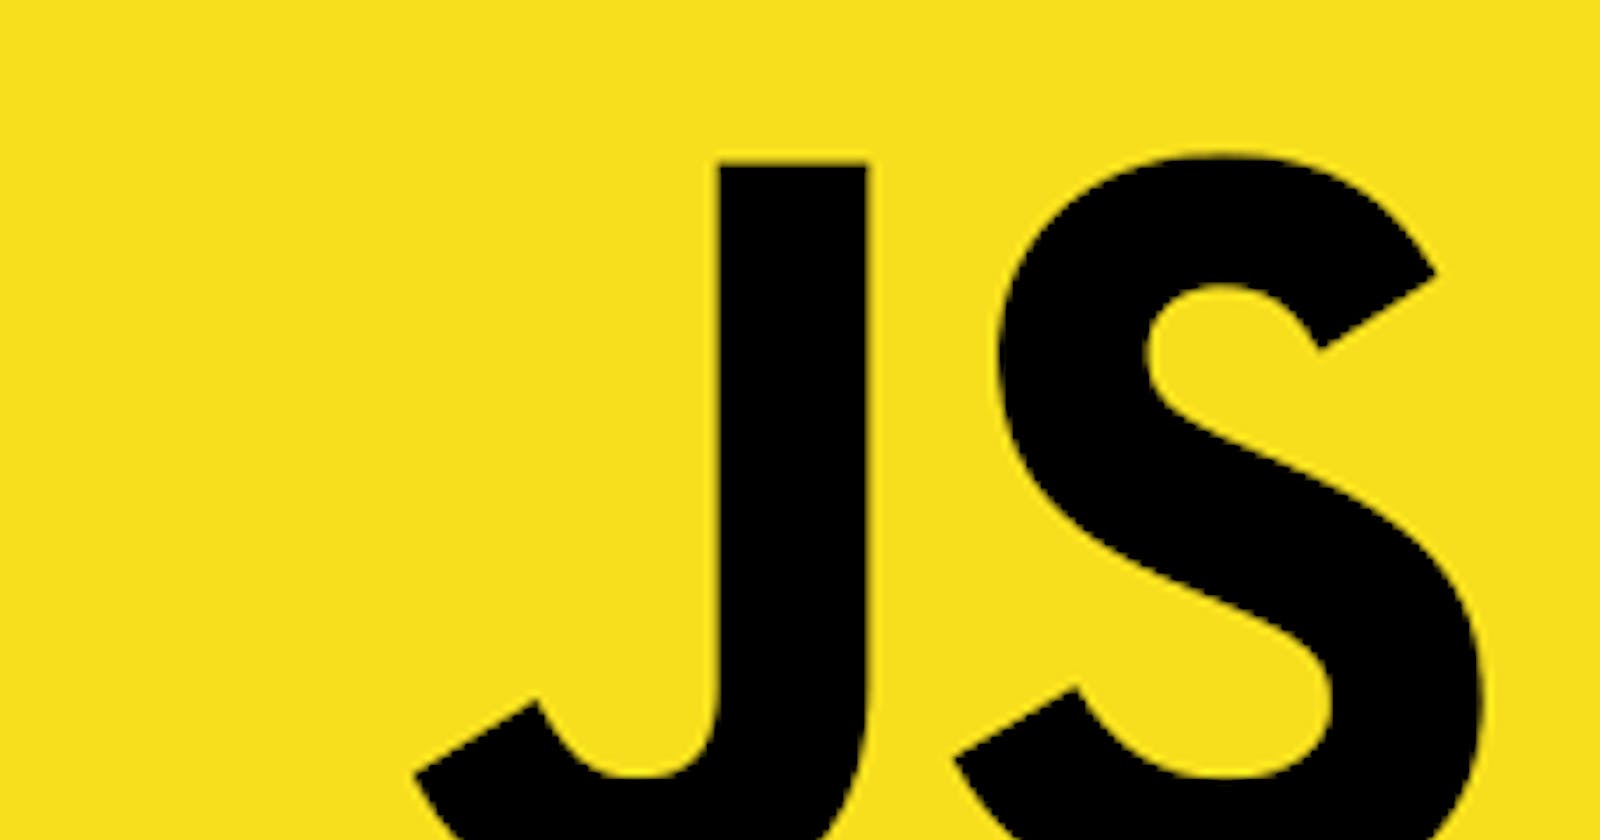 Best practices for writing maintainable and efficient JavaScript code